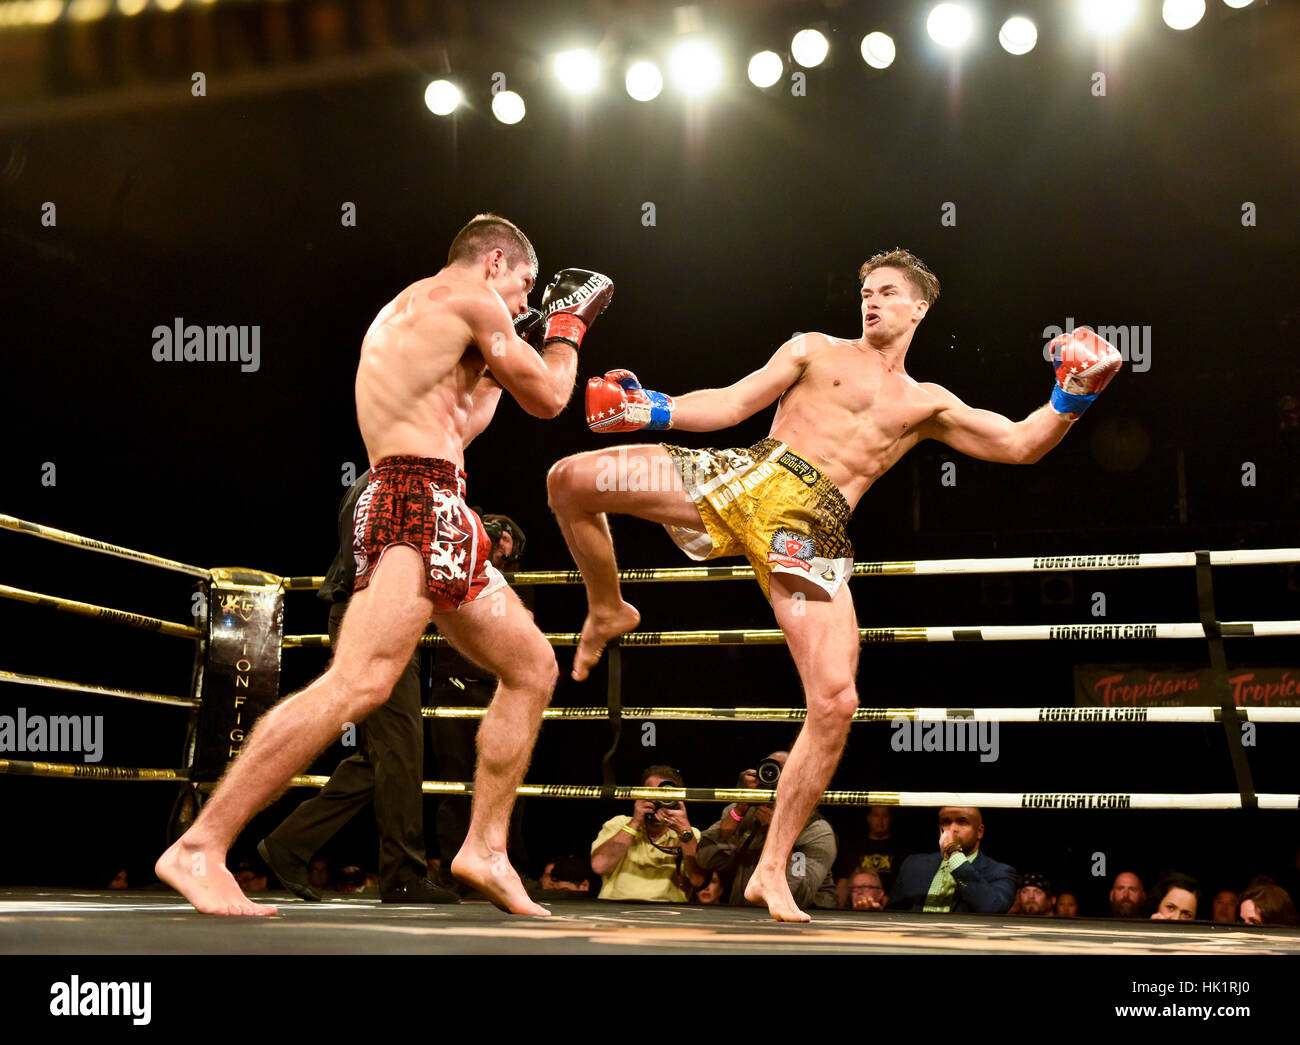 Las Vegas, USA. 3rd Feb, 2017. Competitors fight during the premier Muay Thai Lion Fight 34 at the Tropicana Hotel and Casino in Las Vegas, Nevada. Credit: Ken Howard Images/Alamy Live News Stock Photo